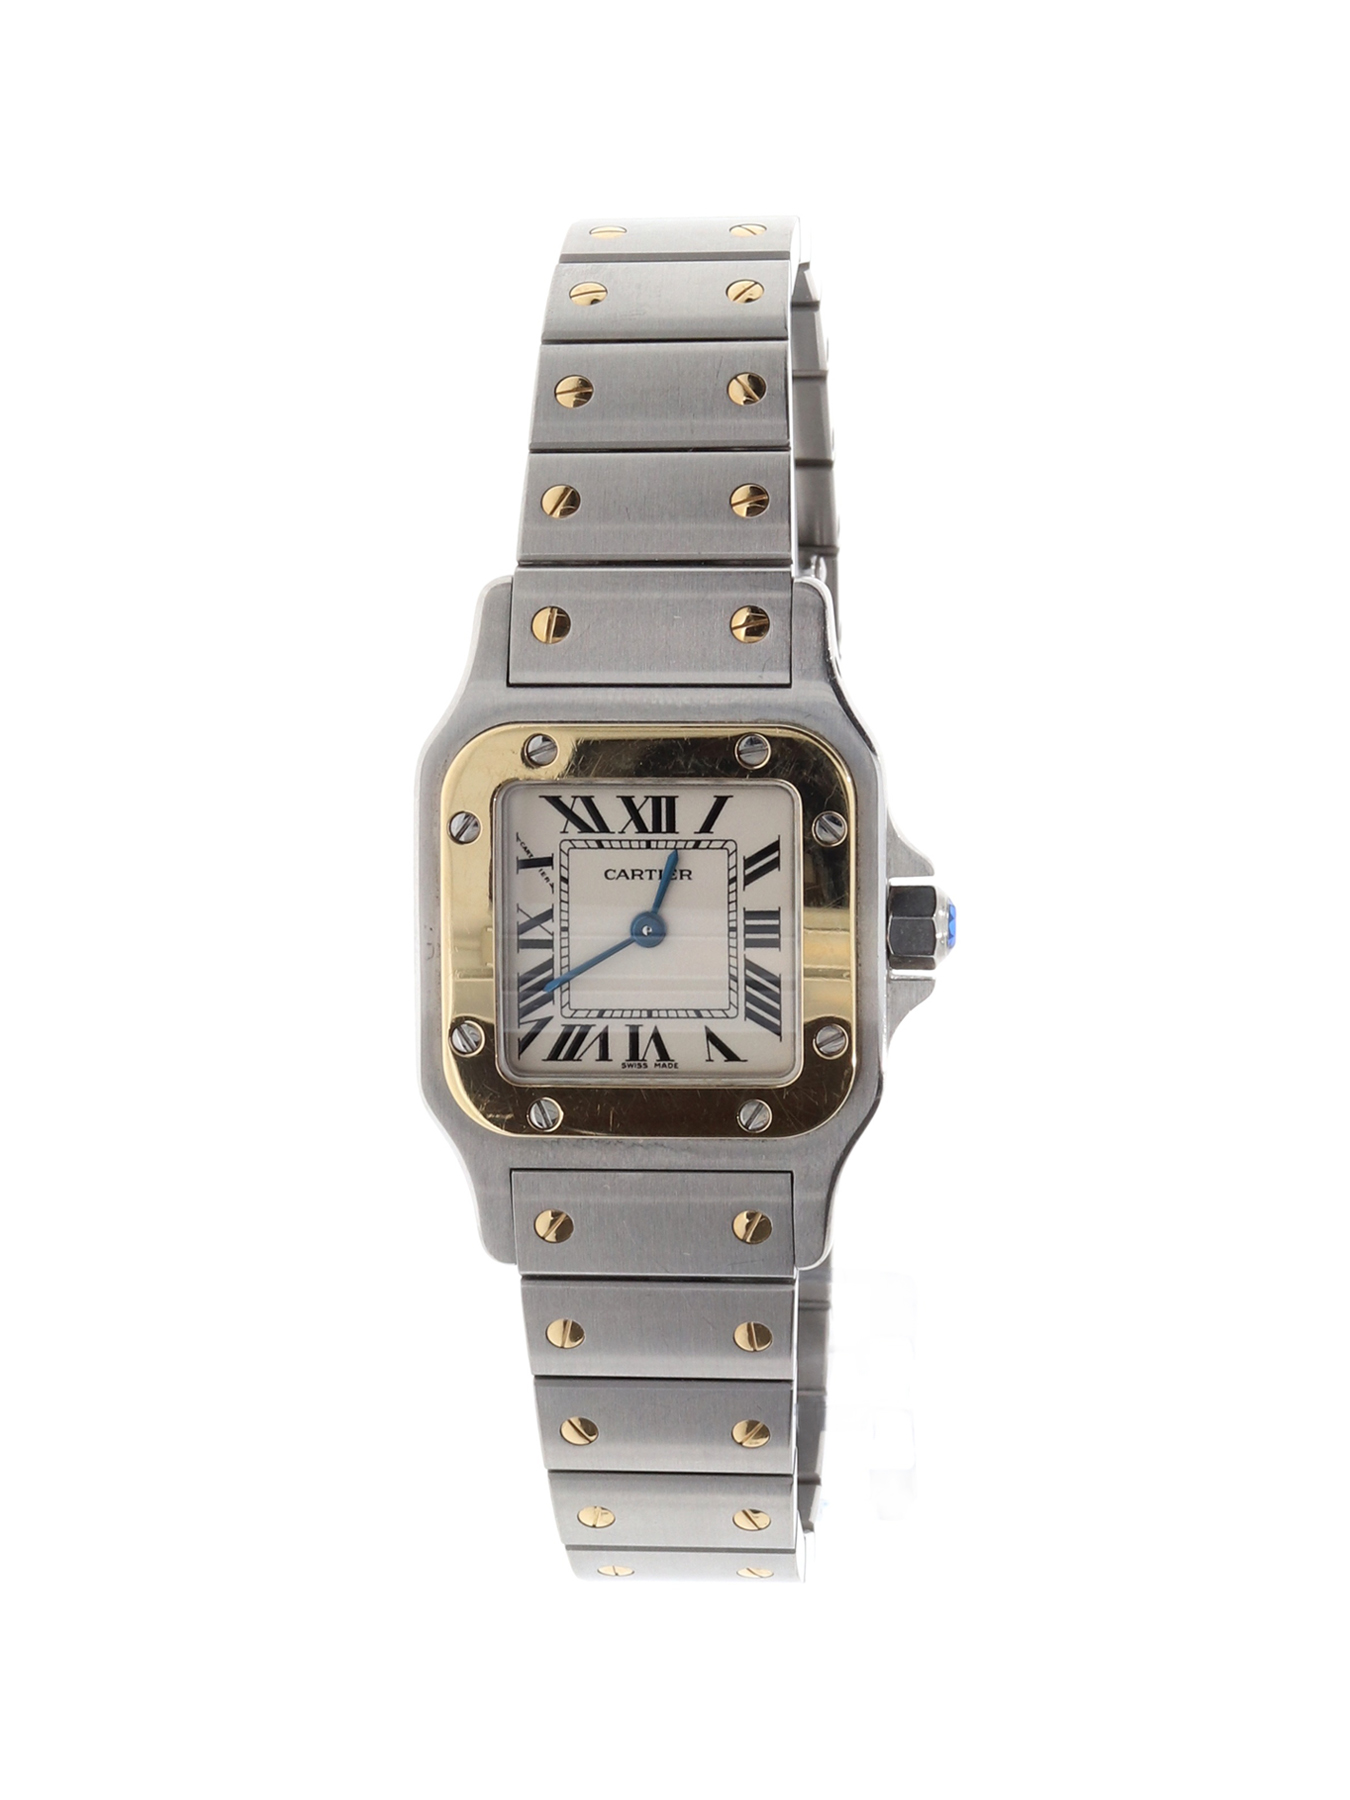 cartier ladys watch